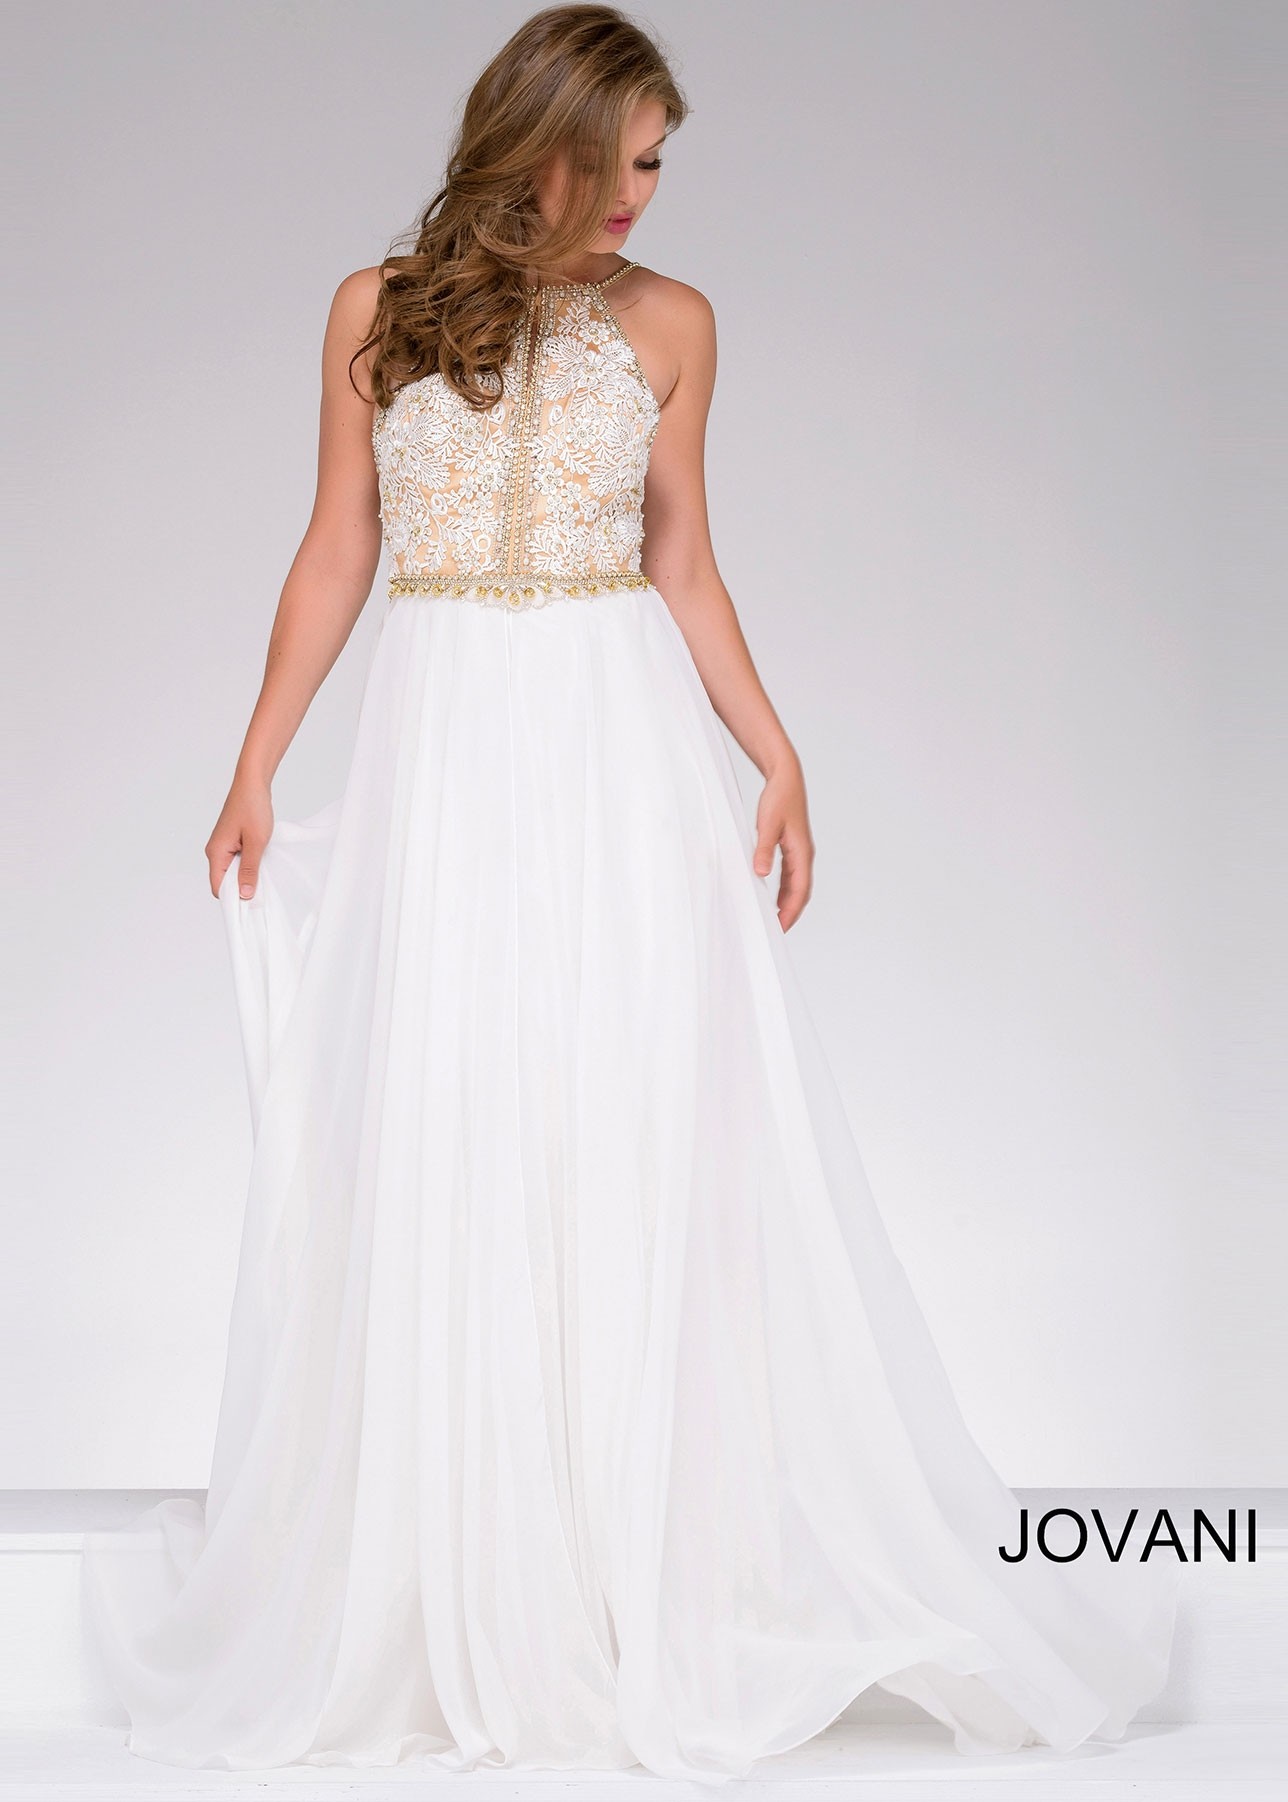 Jovani 41591 Delicate Lace Halter Dress with Open Back